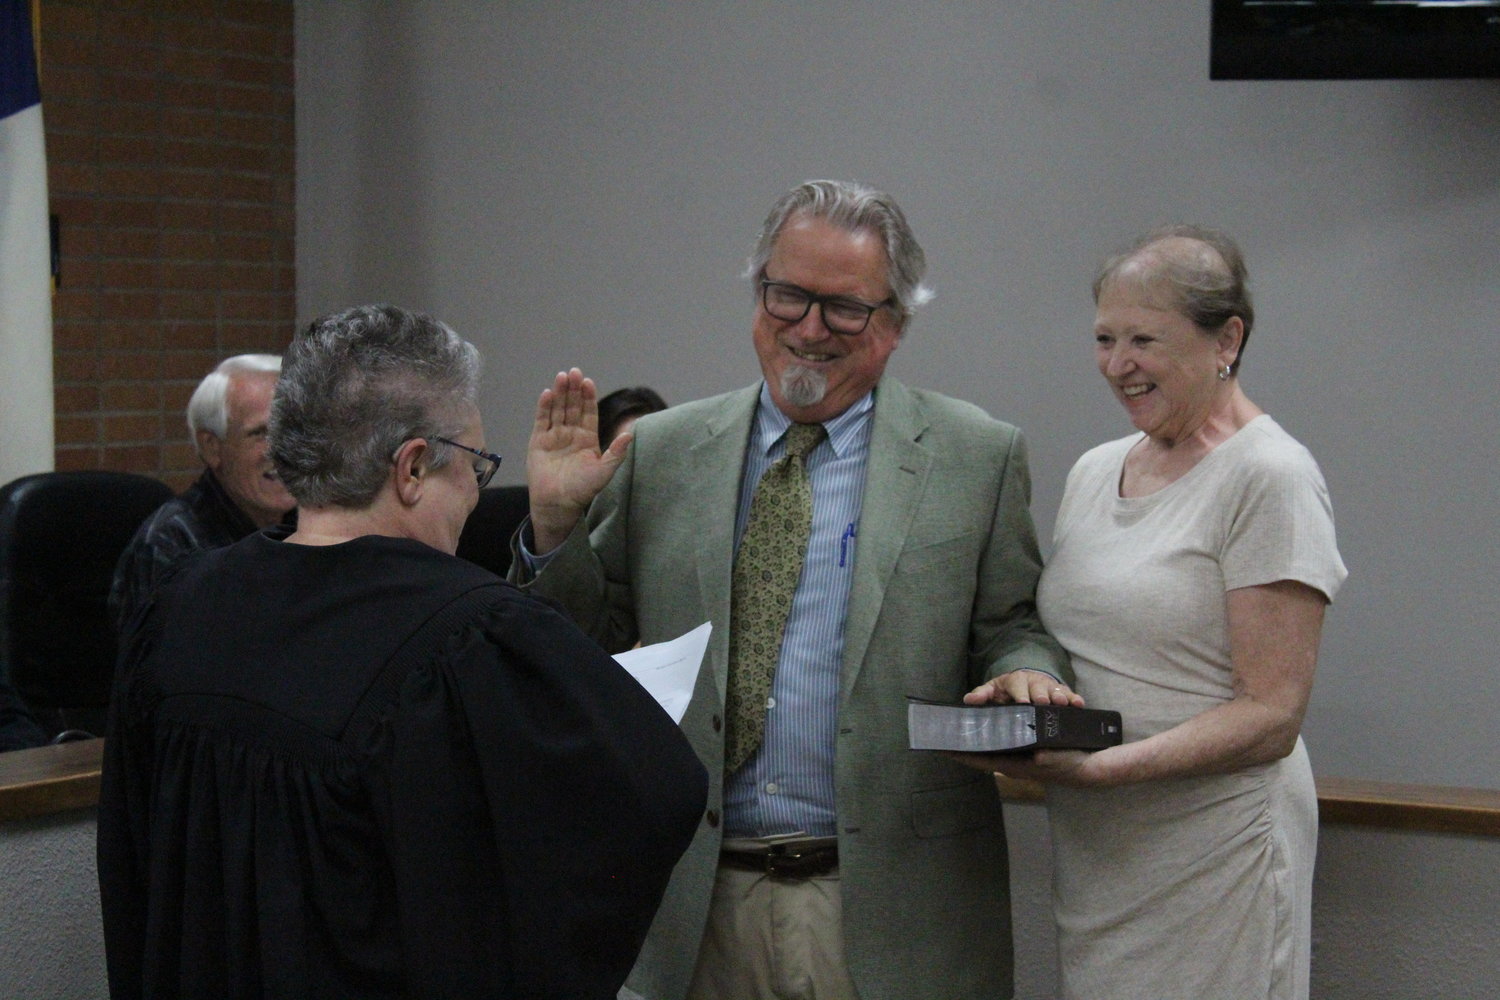 Municipal Judge  Deidra Voigt swears in new Gonzales mayor, S.H. “Steve” Sucher in the council chambers with his wife, Linda Sucher.